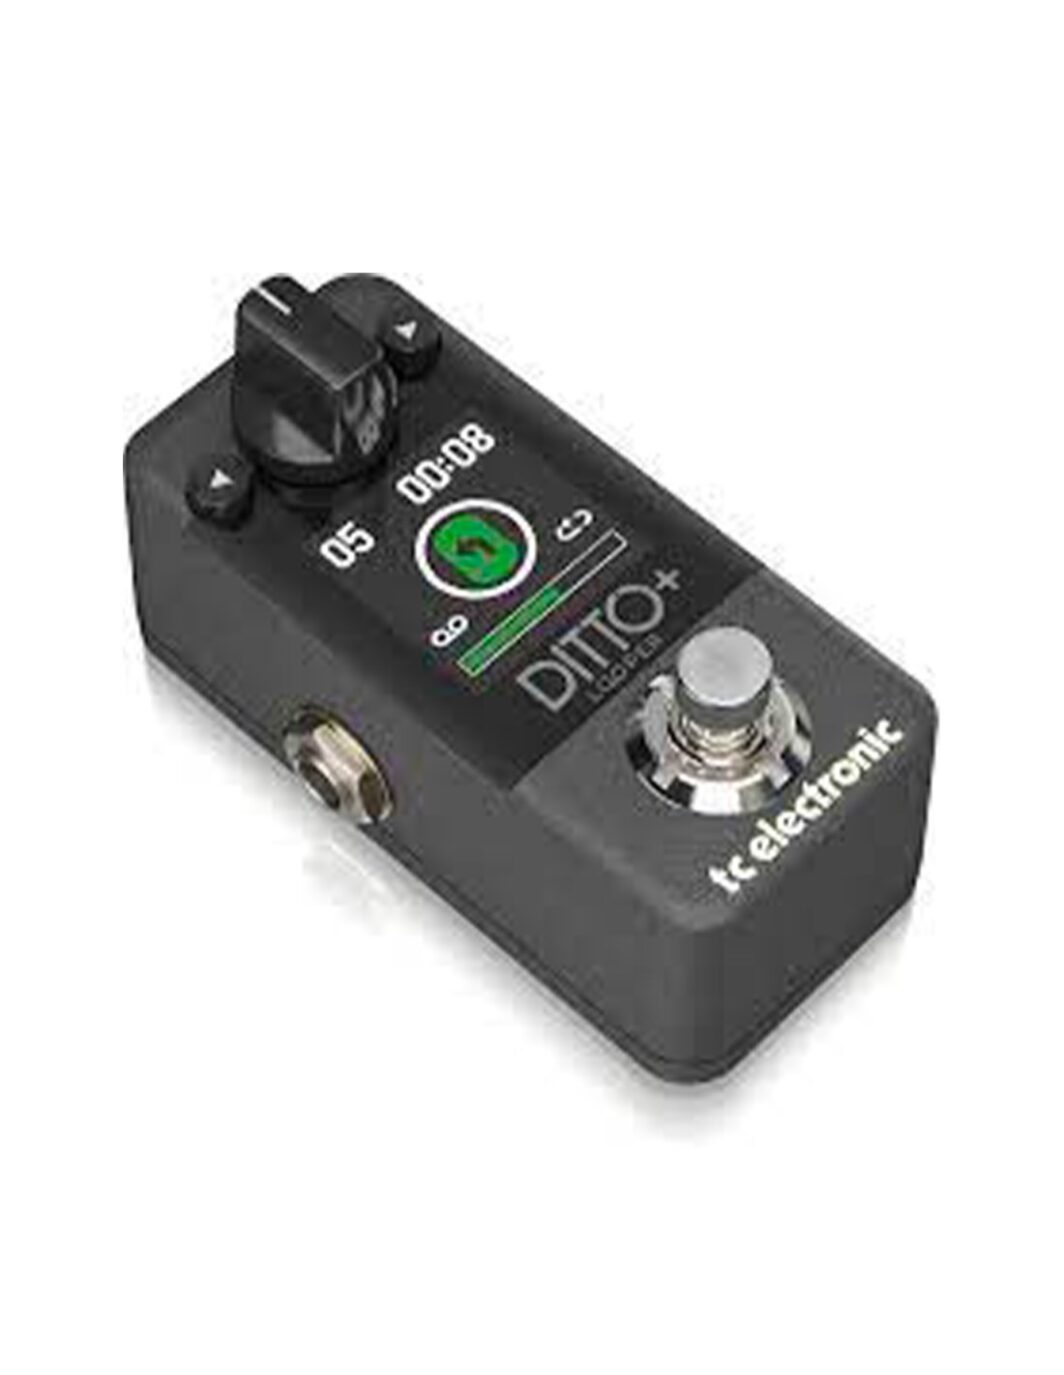 TC ELECTRONIC DITTO+LOOPER